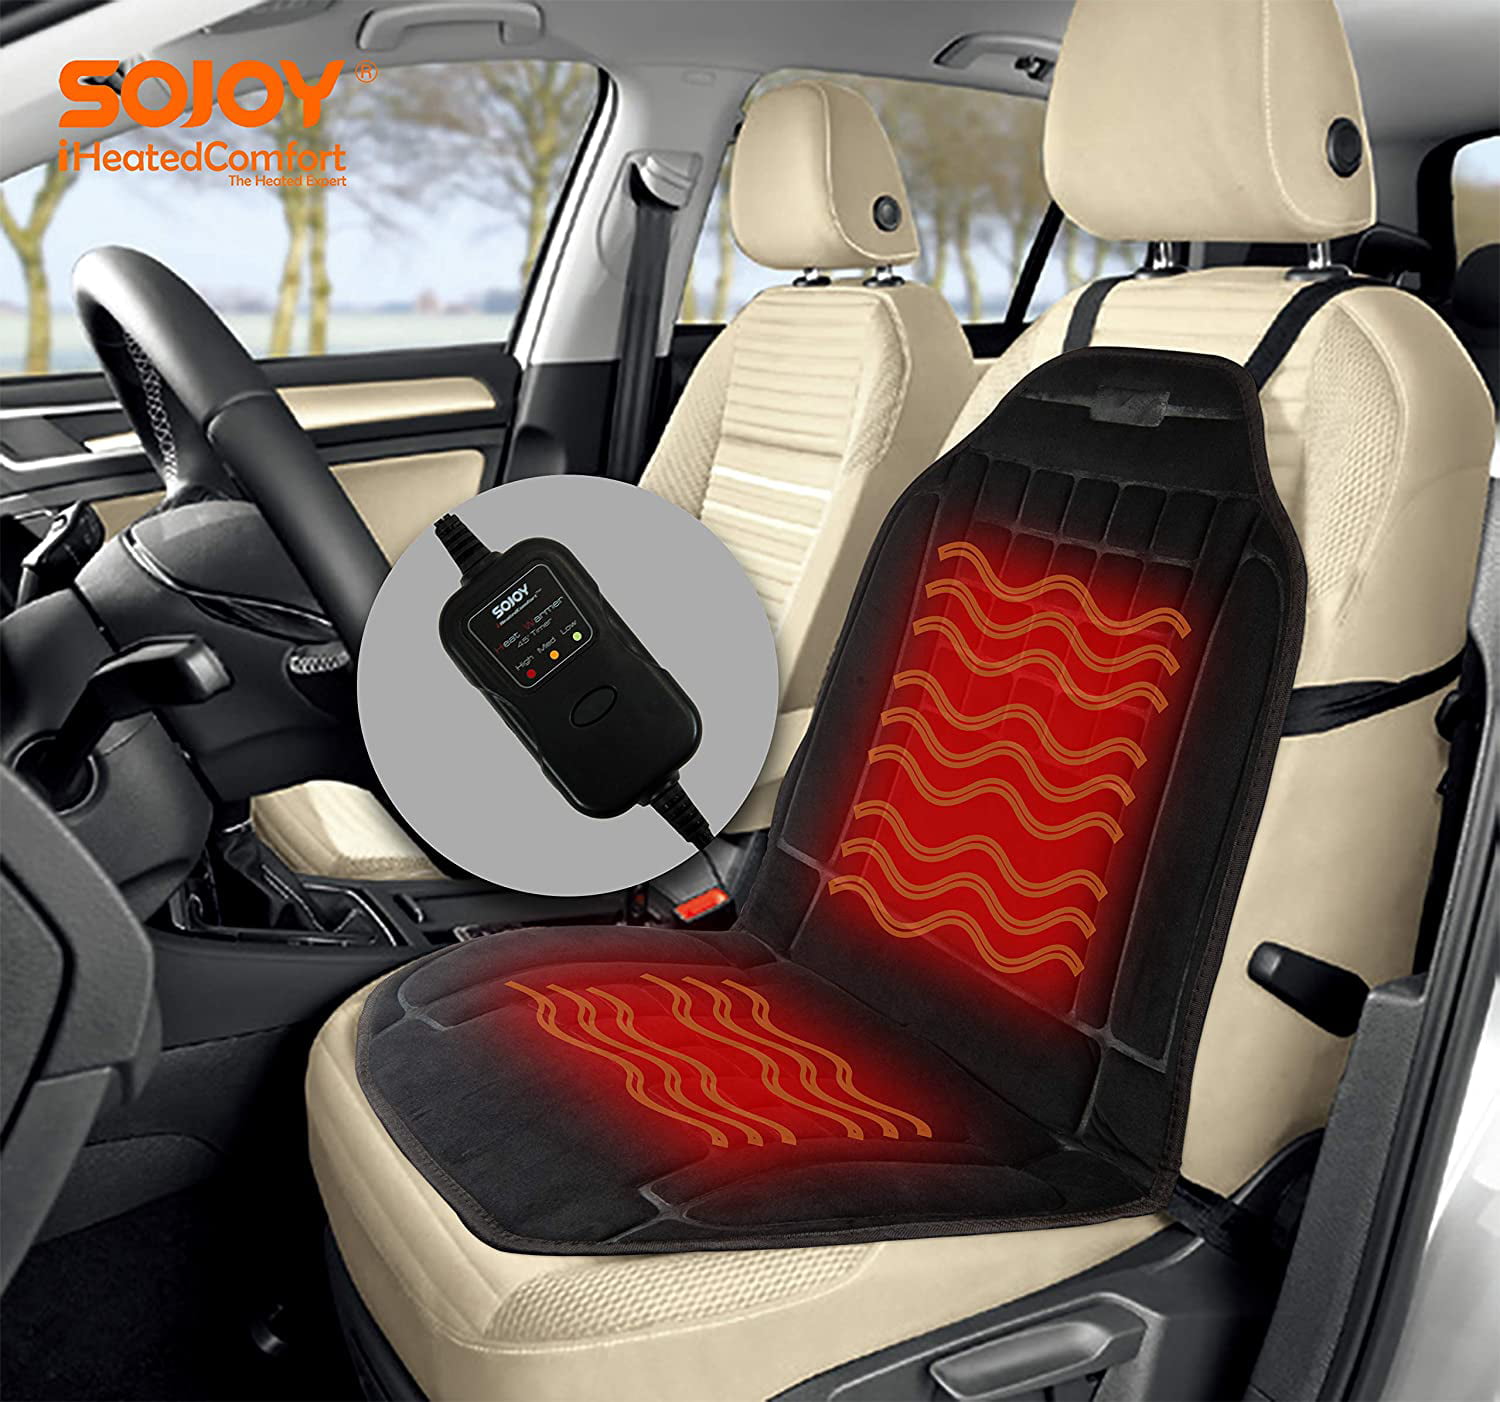 Sojoy Heated Car Seat Cushion-3 Fast Heating Pads with Auto Shut Off Timer-Car Seat Warmer Seat Heater for Cold Winter Days(Black) by Sojoy